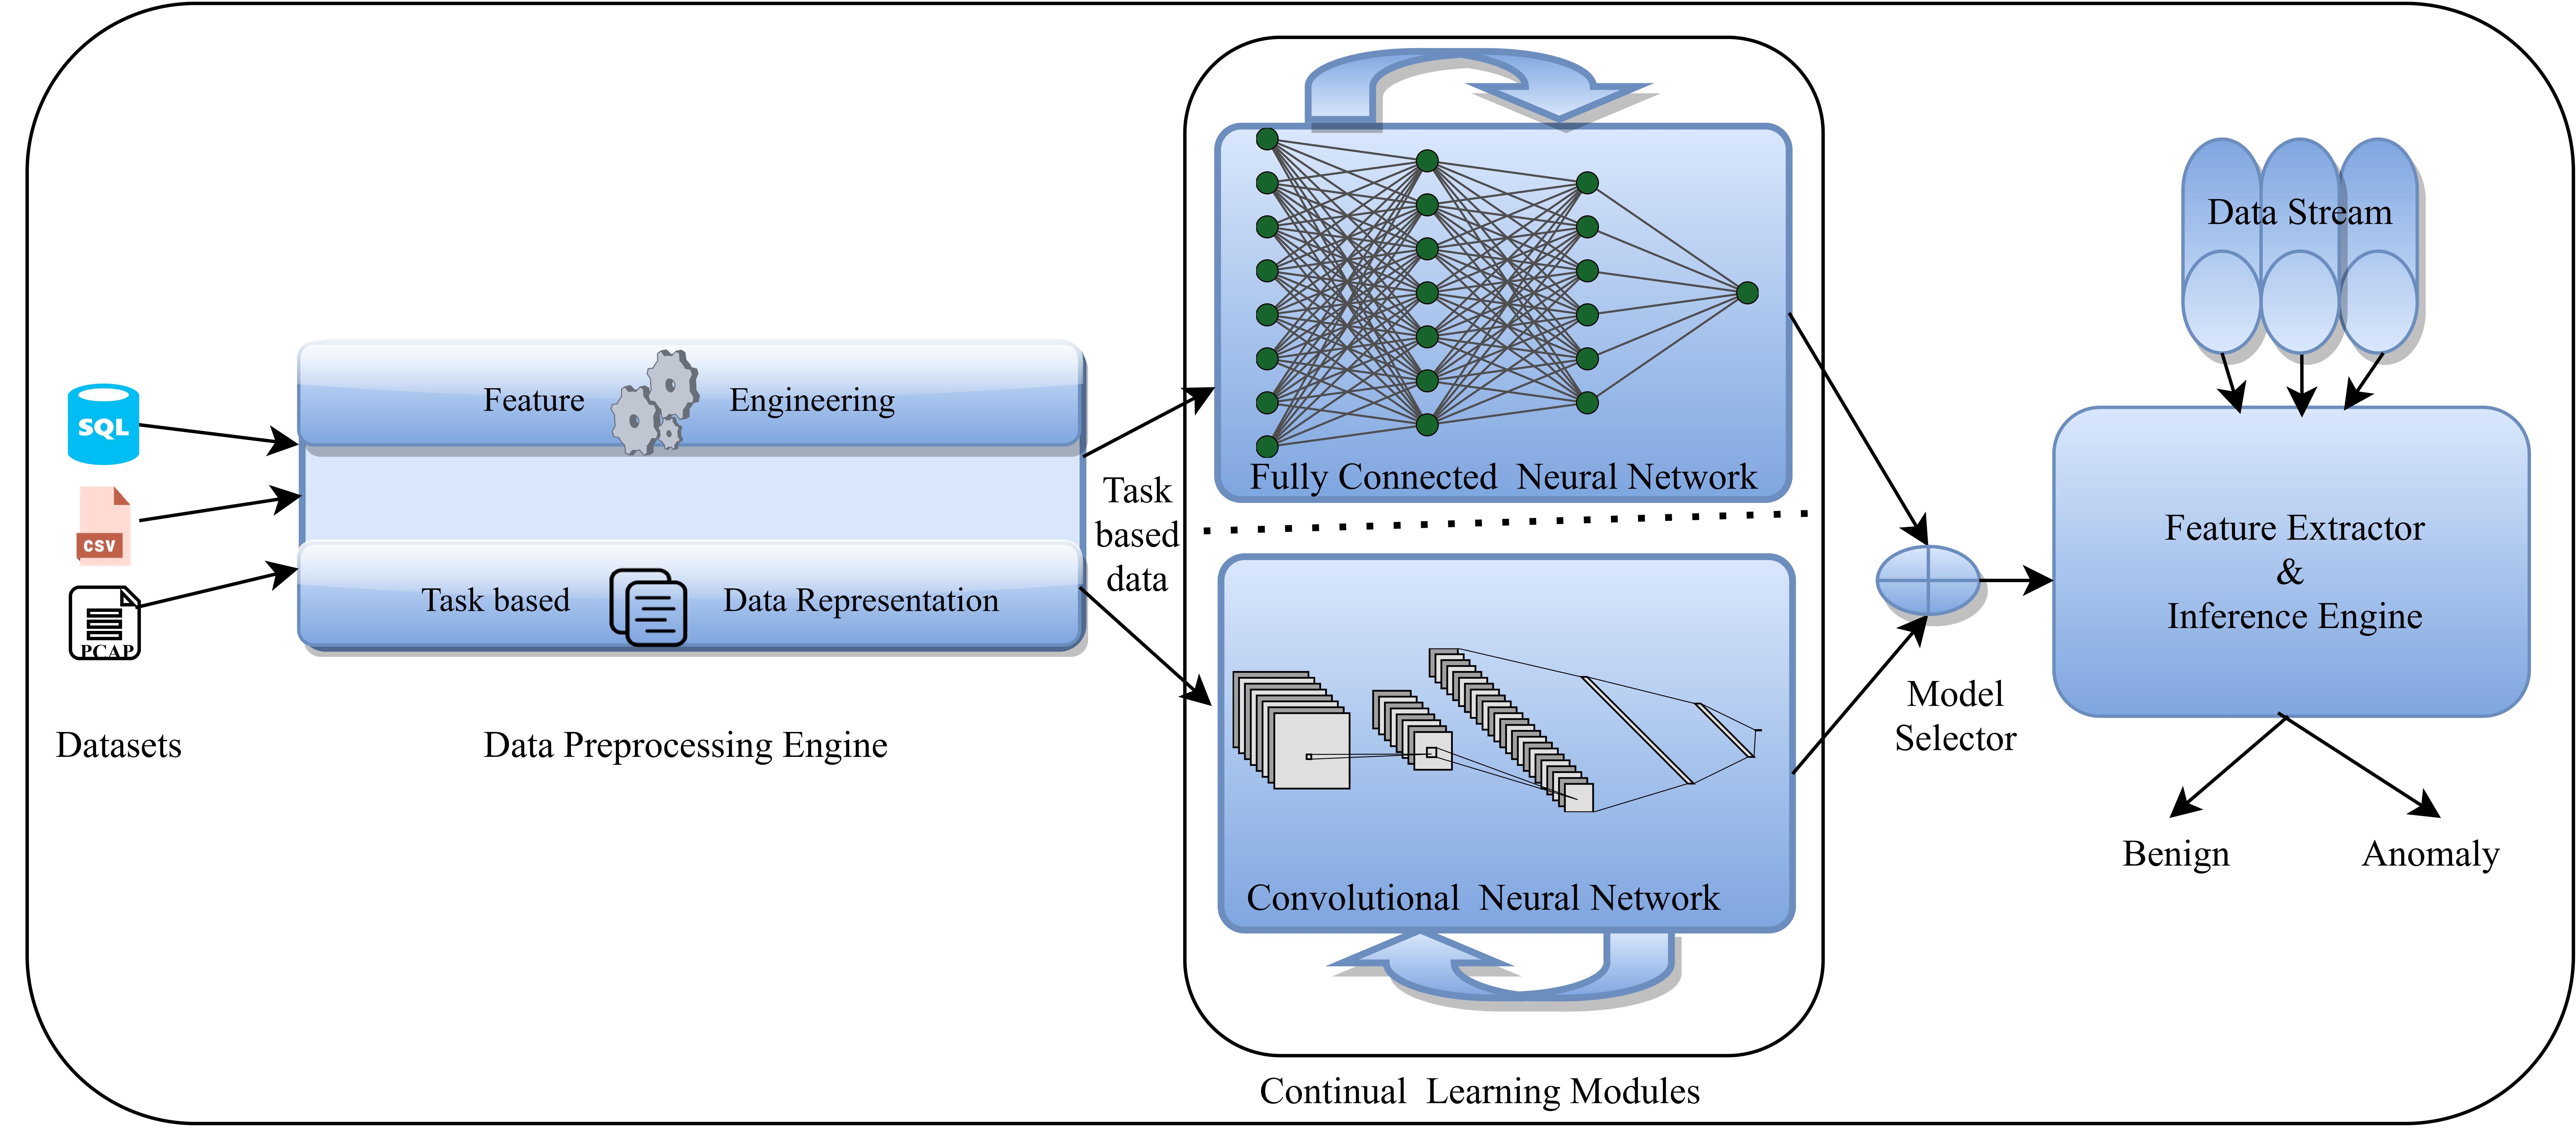 HFig: Architecture of continual learning based anomaly network intrusion detection system